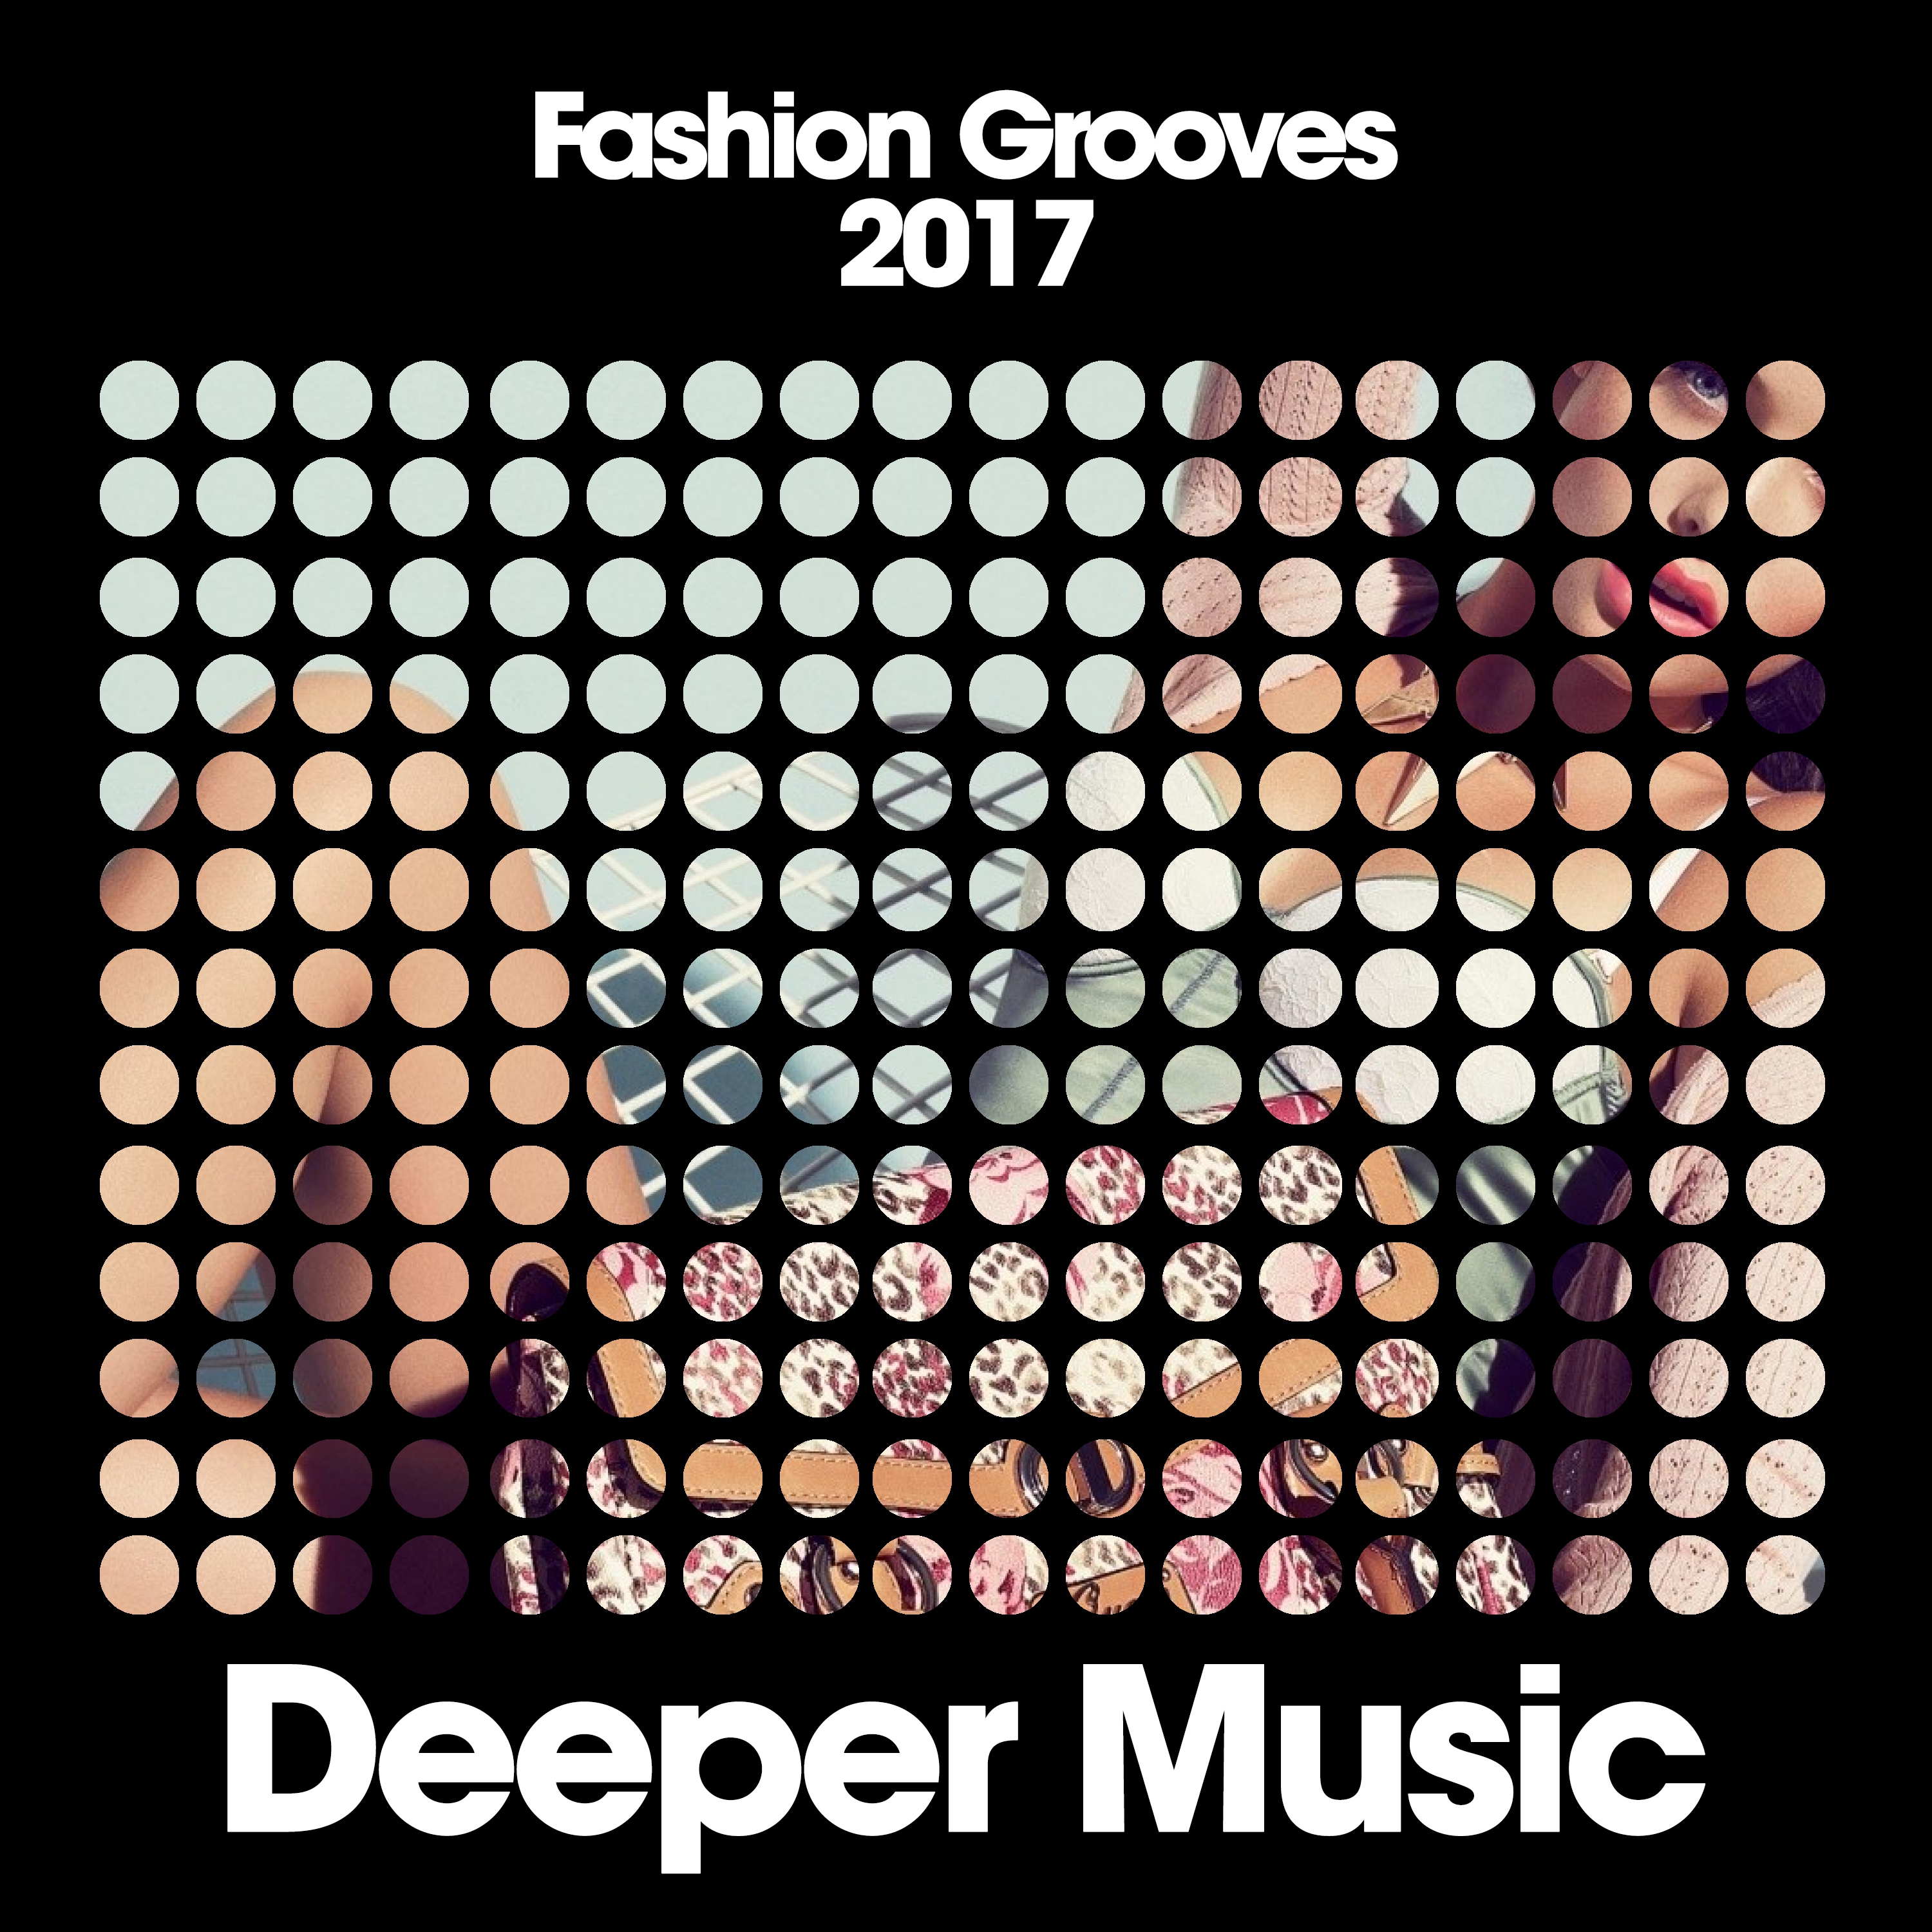 Fashion Grooves 2017